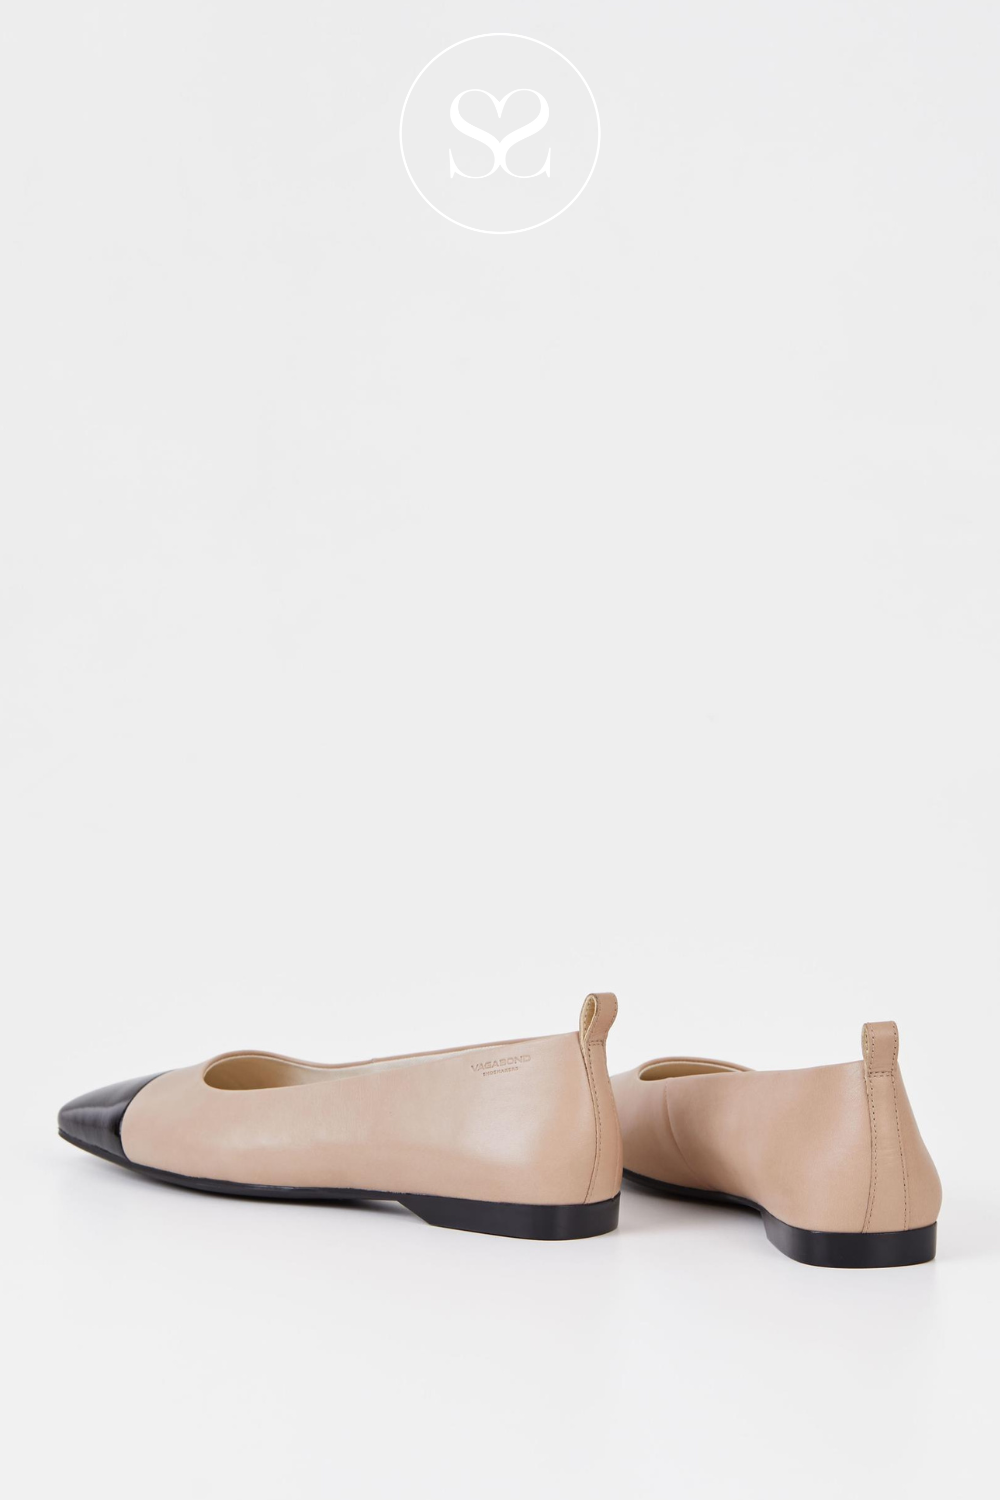 Comfortable everyday flats from Vagabond shoes